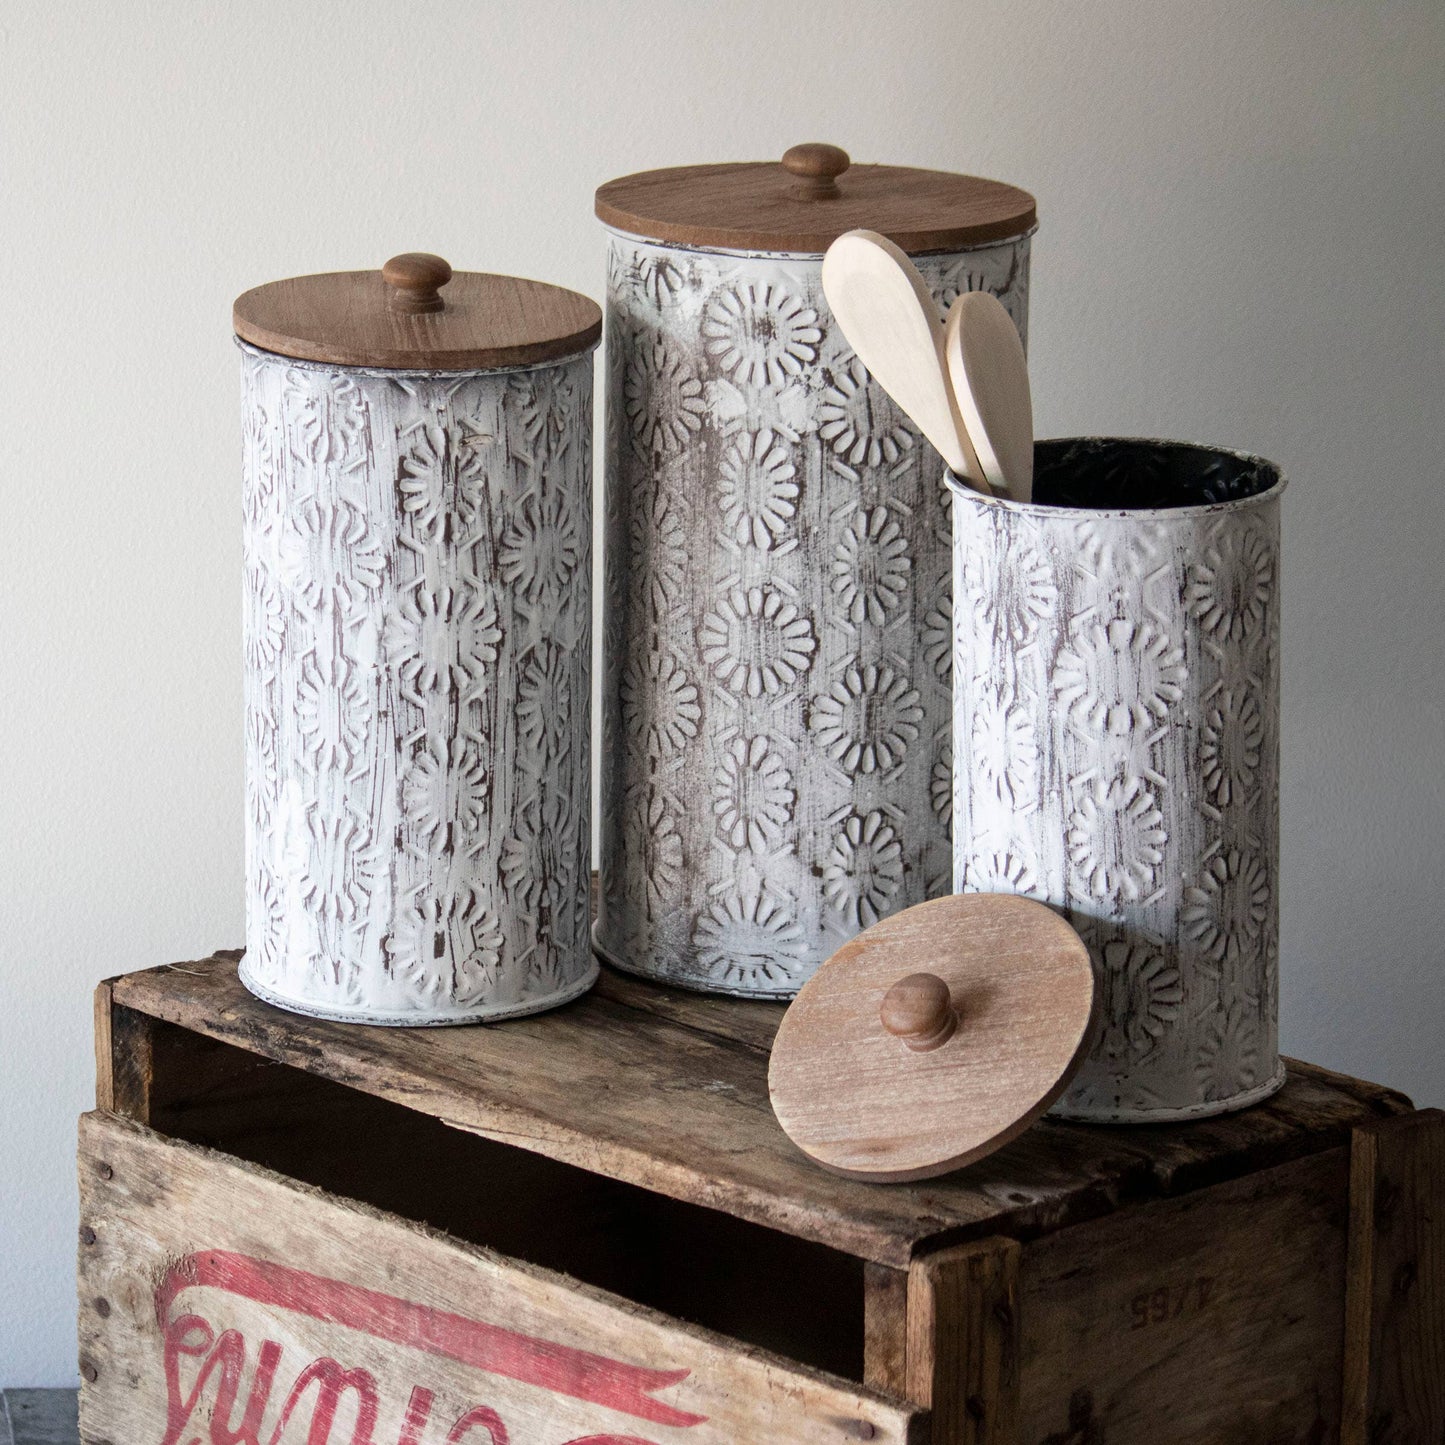 Ariana Nested Canisters